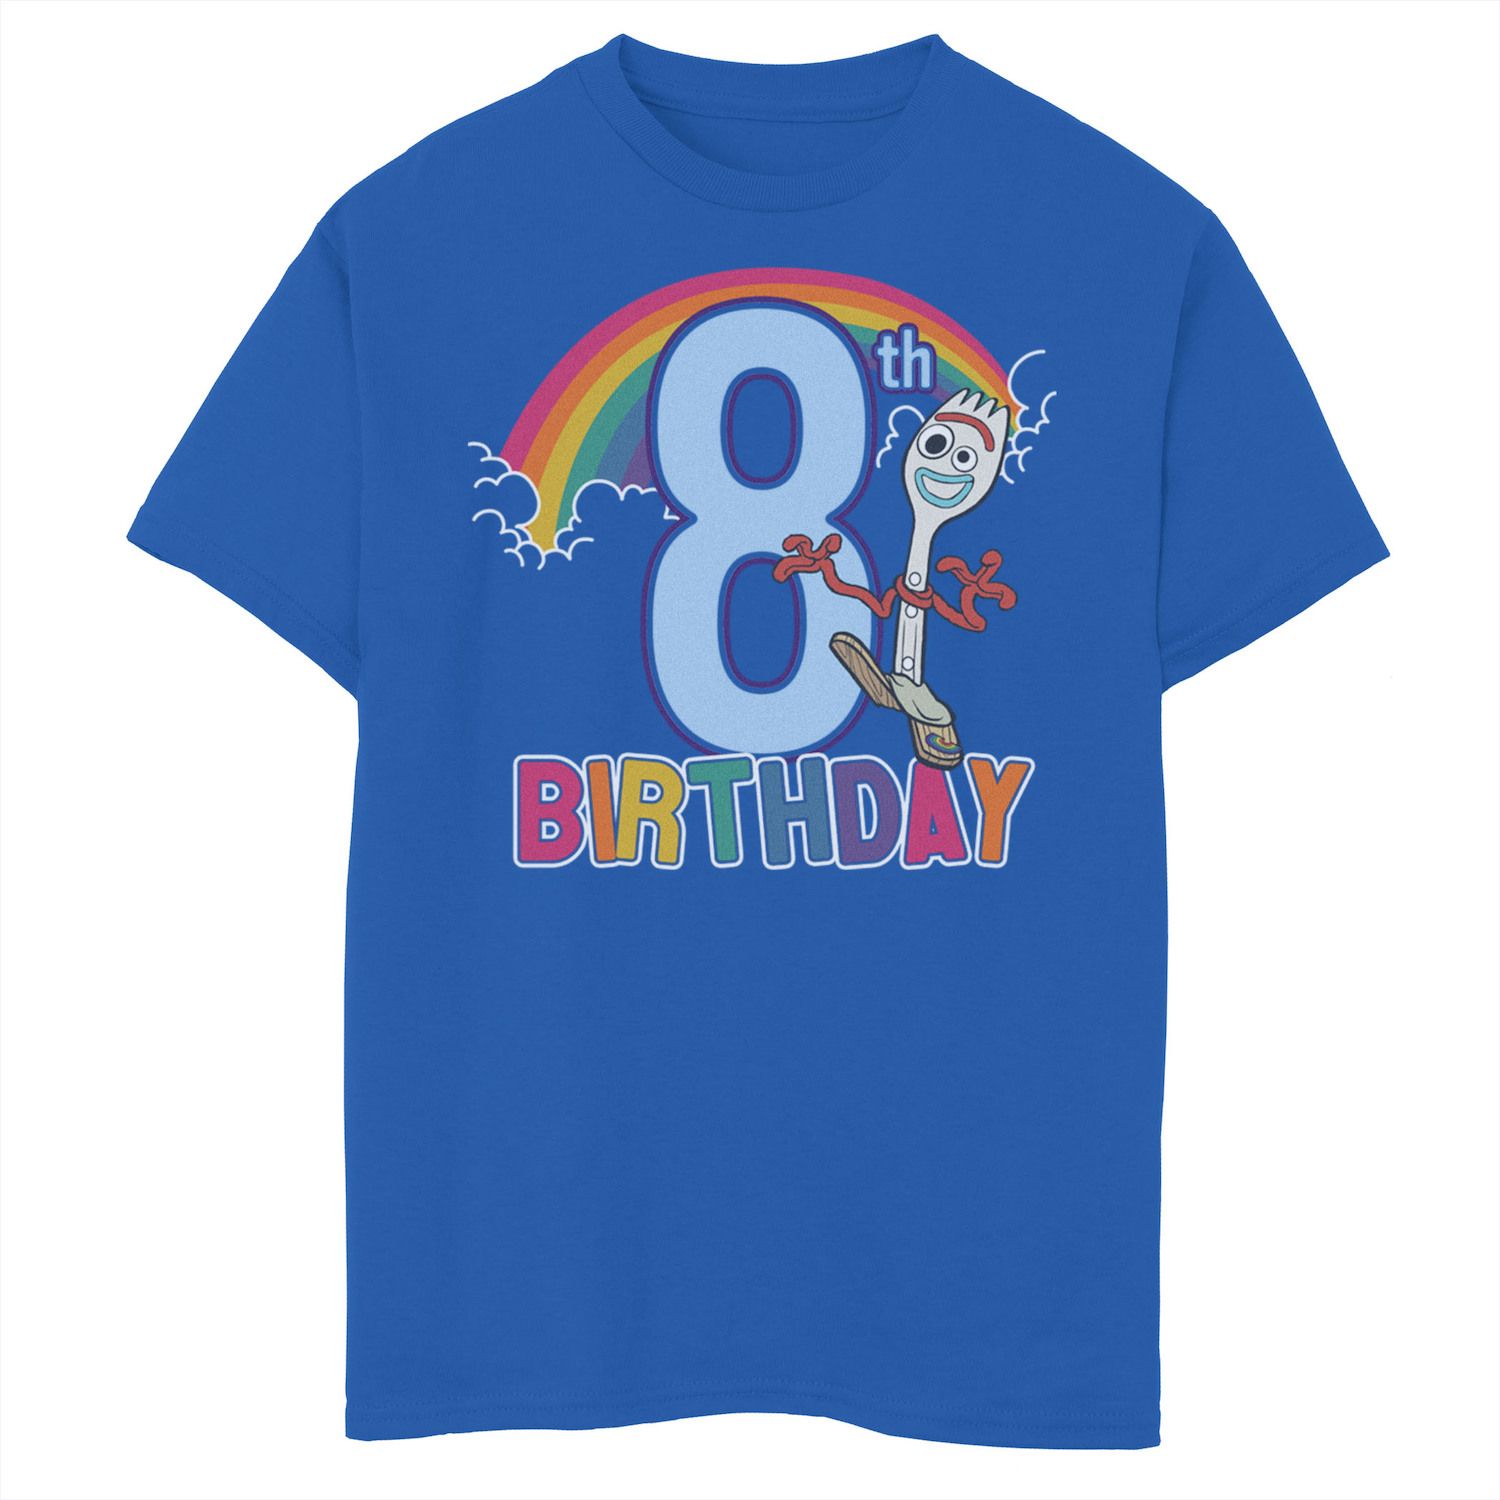 Image for Disney / Pixar 's Toy Story 4 Boys 8-20 Forky 8th Rainbow Birthday Graphic Tee at Kohl's.